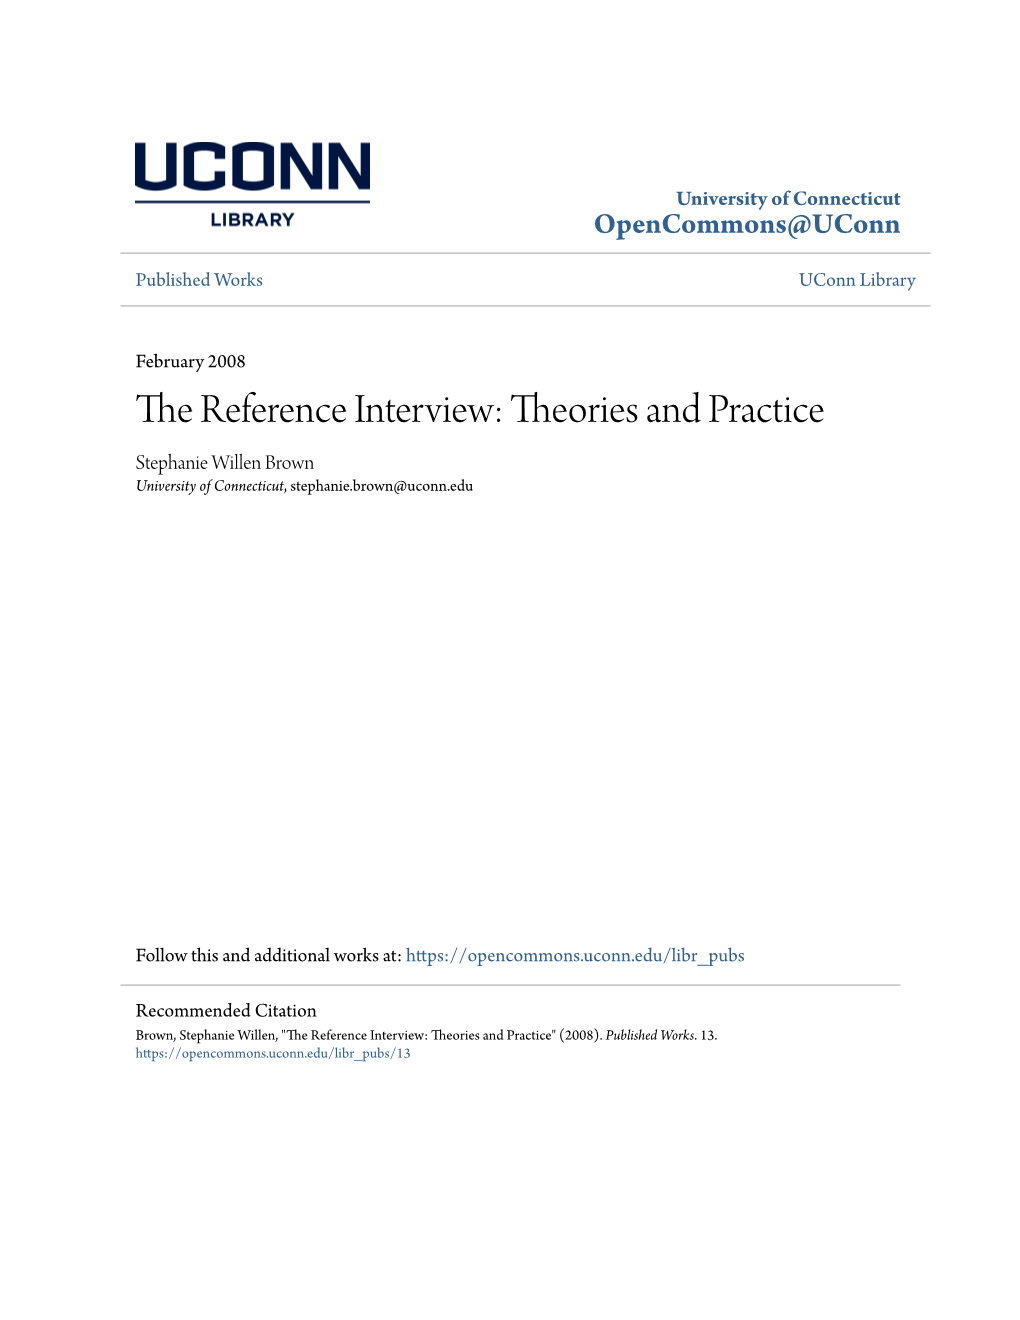 The Reference Interview: Theories and Practice Stephanie Willen Brown University of Connecticut, Stephanie.Brown@Uconn.Edu